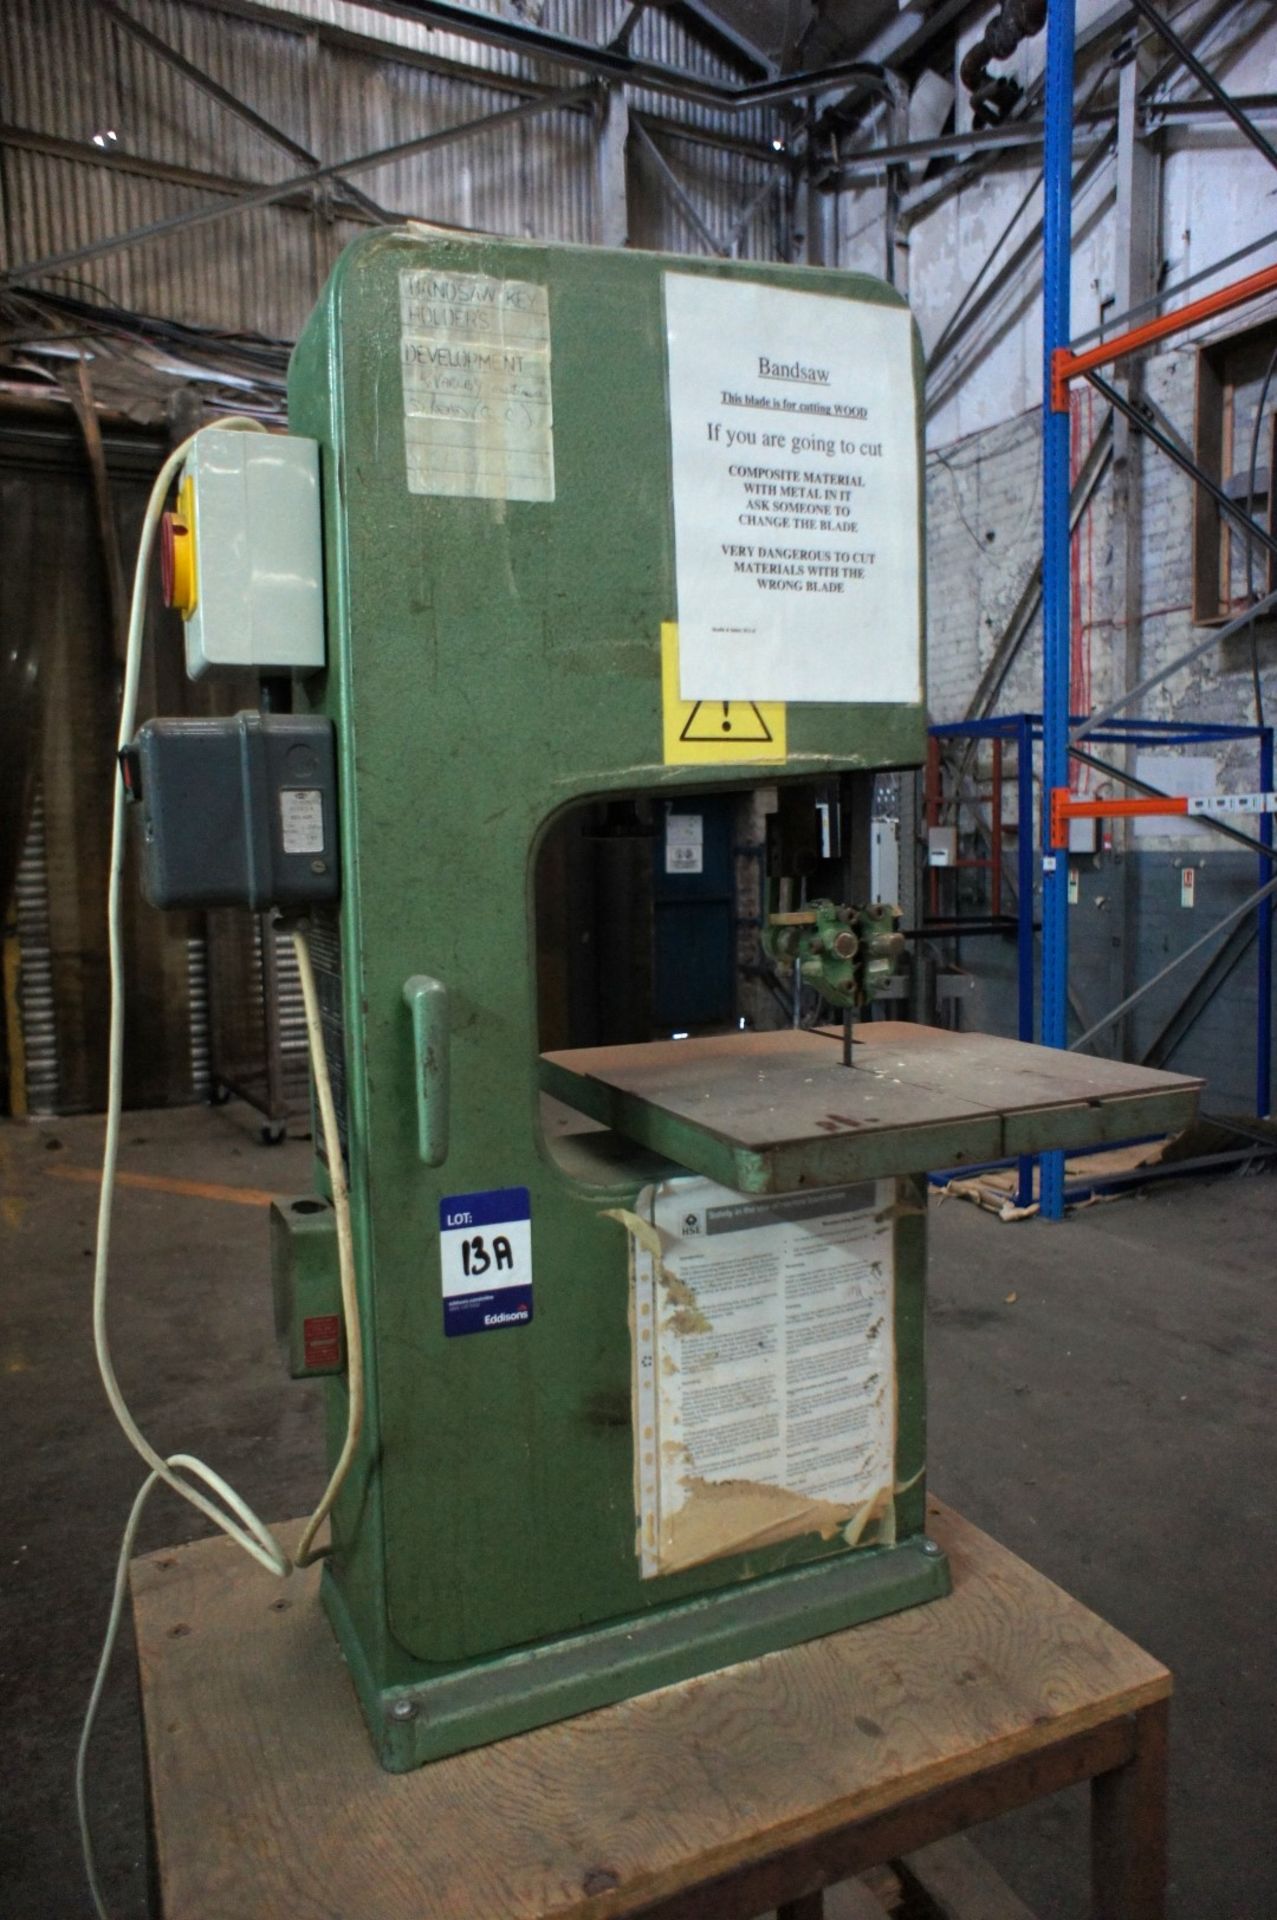 * Startrite 3622 Wood Band Saw 240V. Located at site 2 - Image 4 of 4